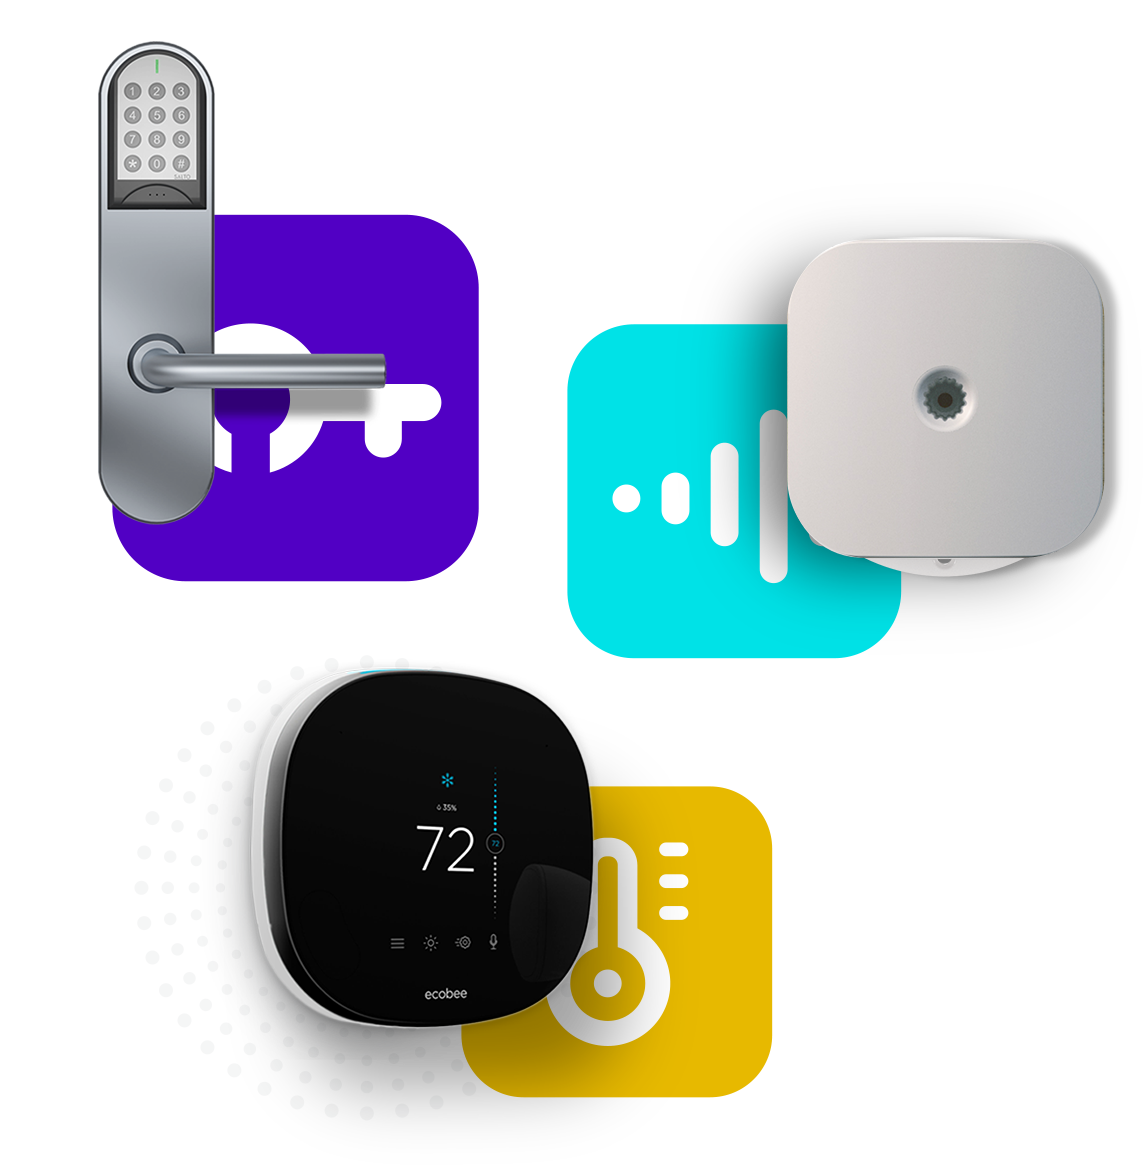 07_Images and symbols of smart lock and noise and occupancy monitoring devices